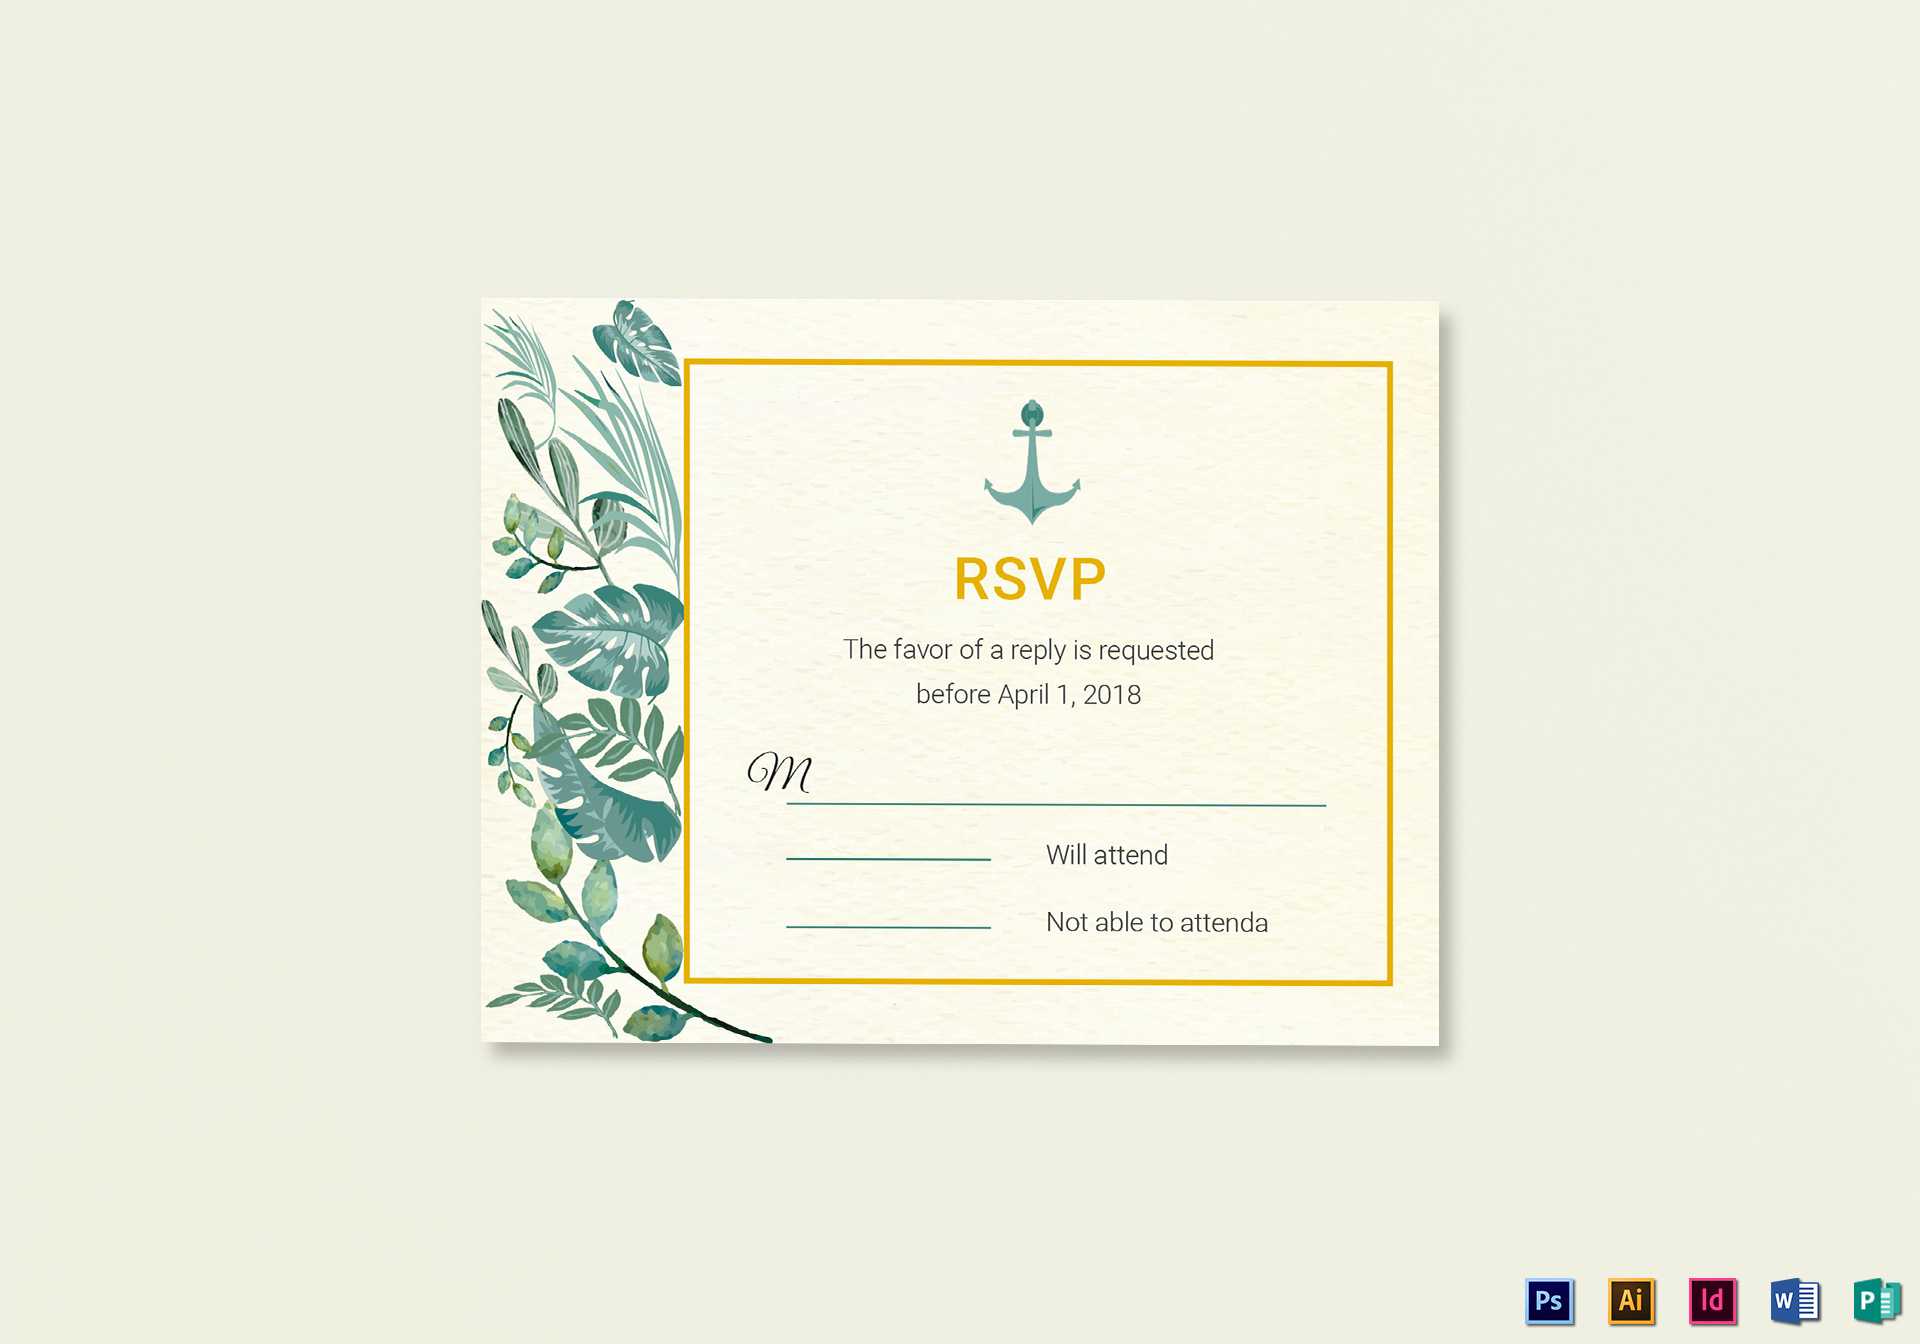 005 Rsvp Wedding Cards Templates Template Incredible Ideas Intended For Template For Rsvp Cards For Wedding